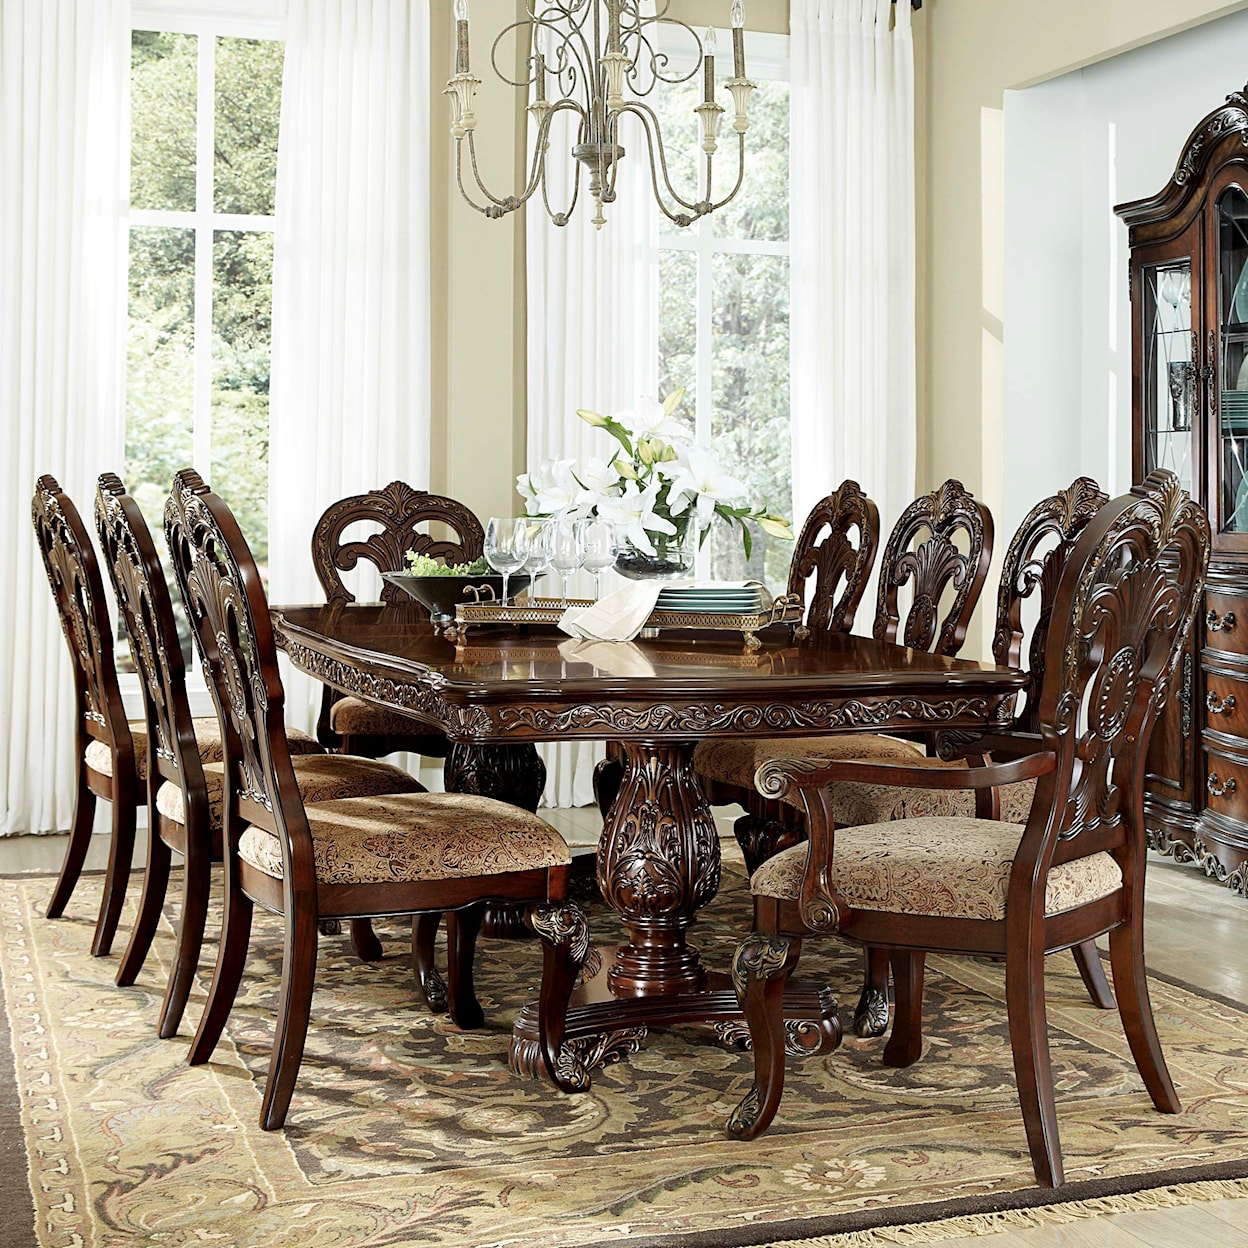 Homelegance Deryn Park Dining Table and Chair Set